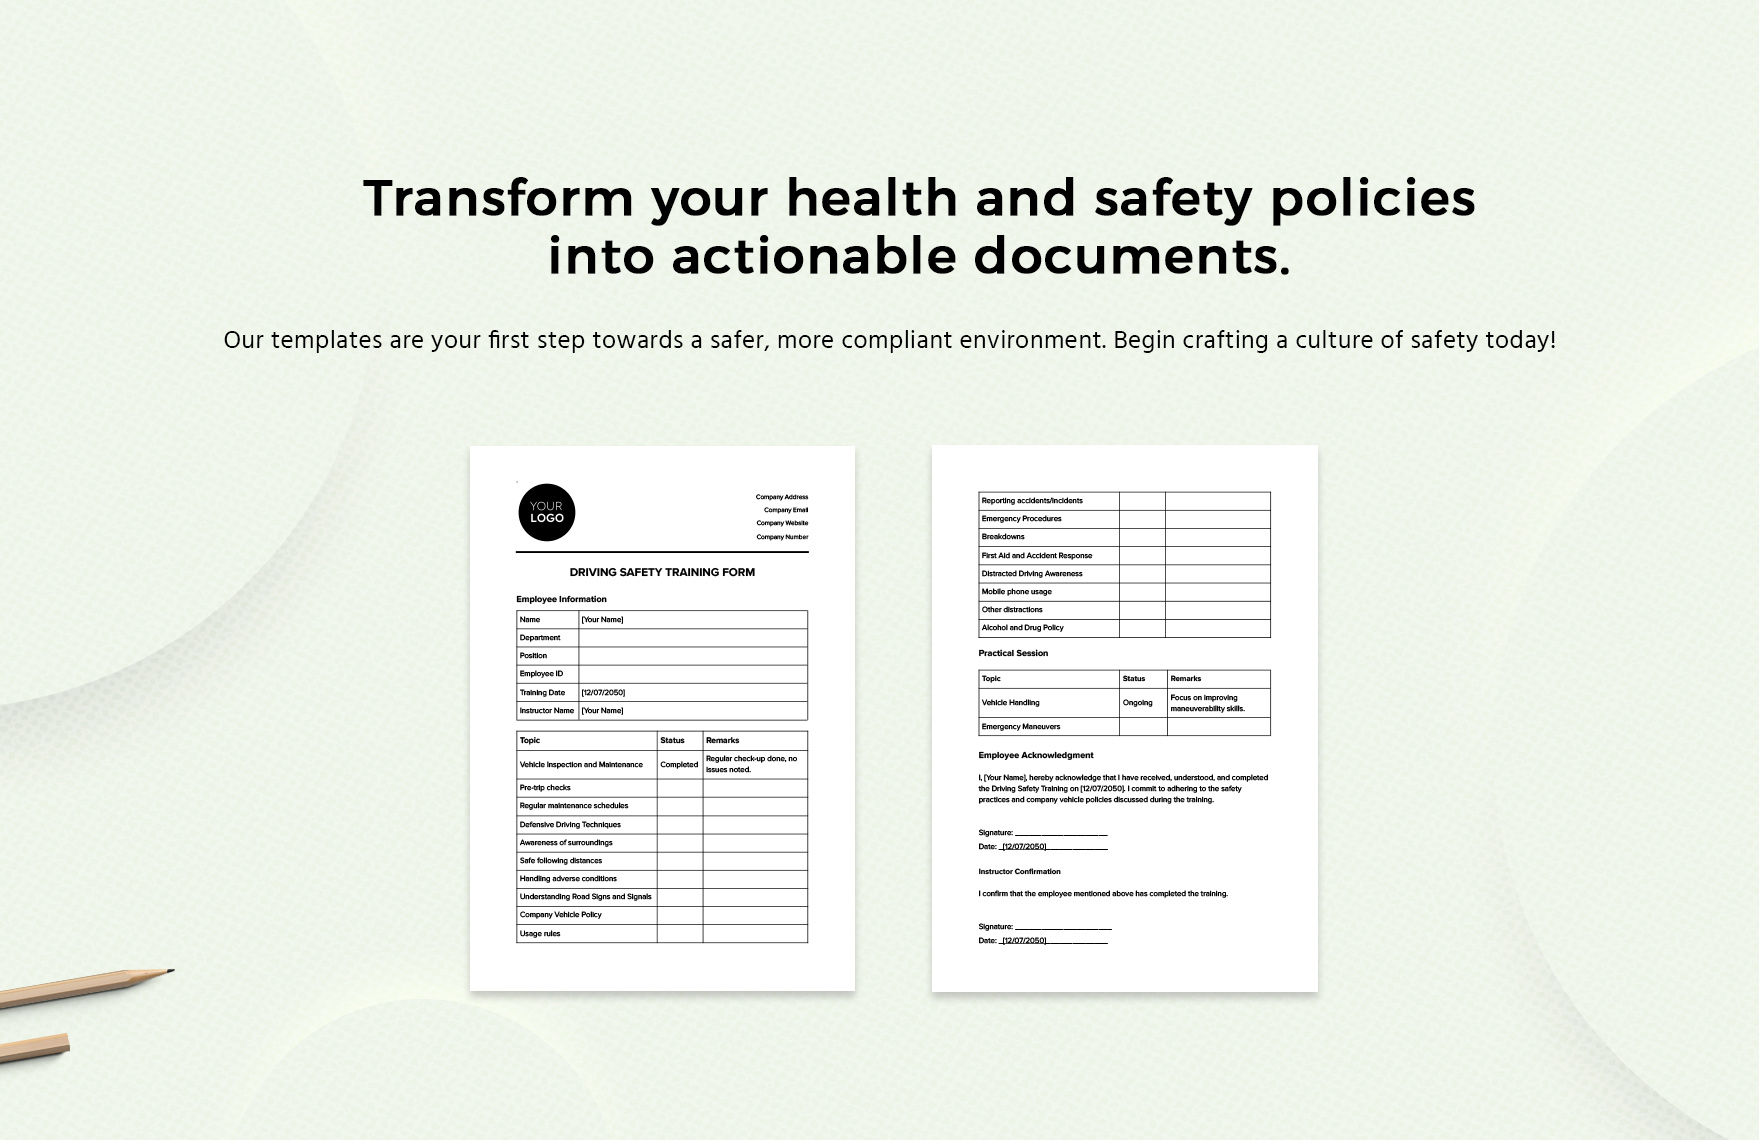 Driving Safety Training Form Template